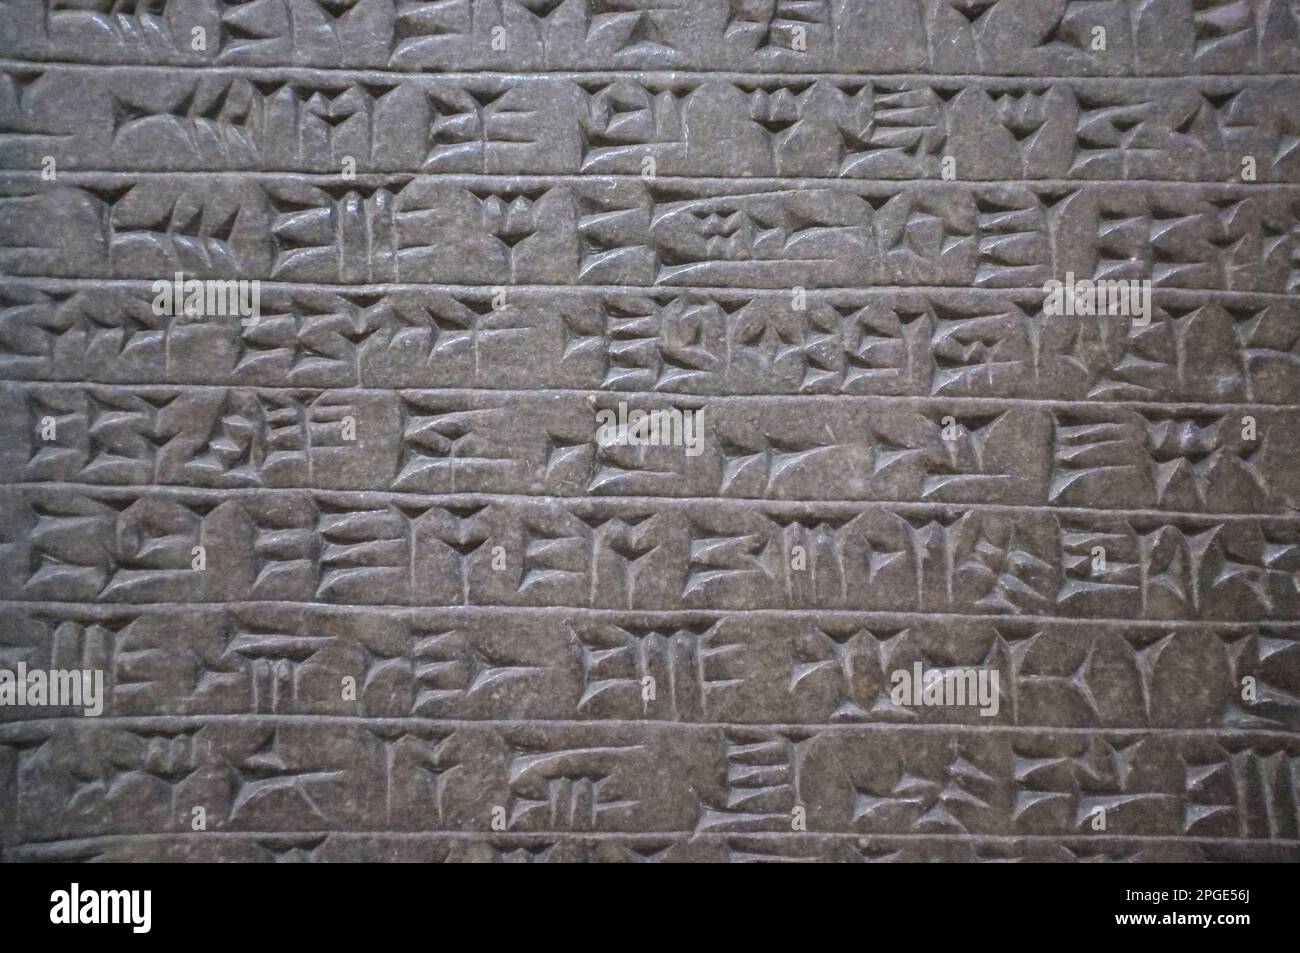 Cuneiform writing example from the Sumerian languages at the British Museum, London - cuneiform stone tablet Stock Photo